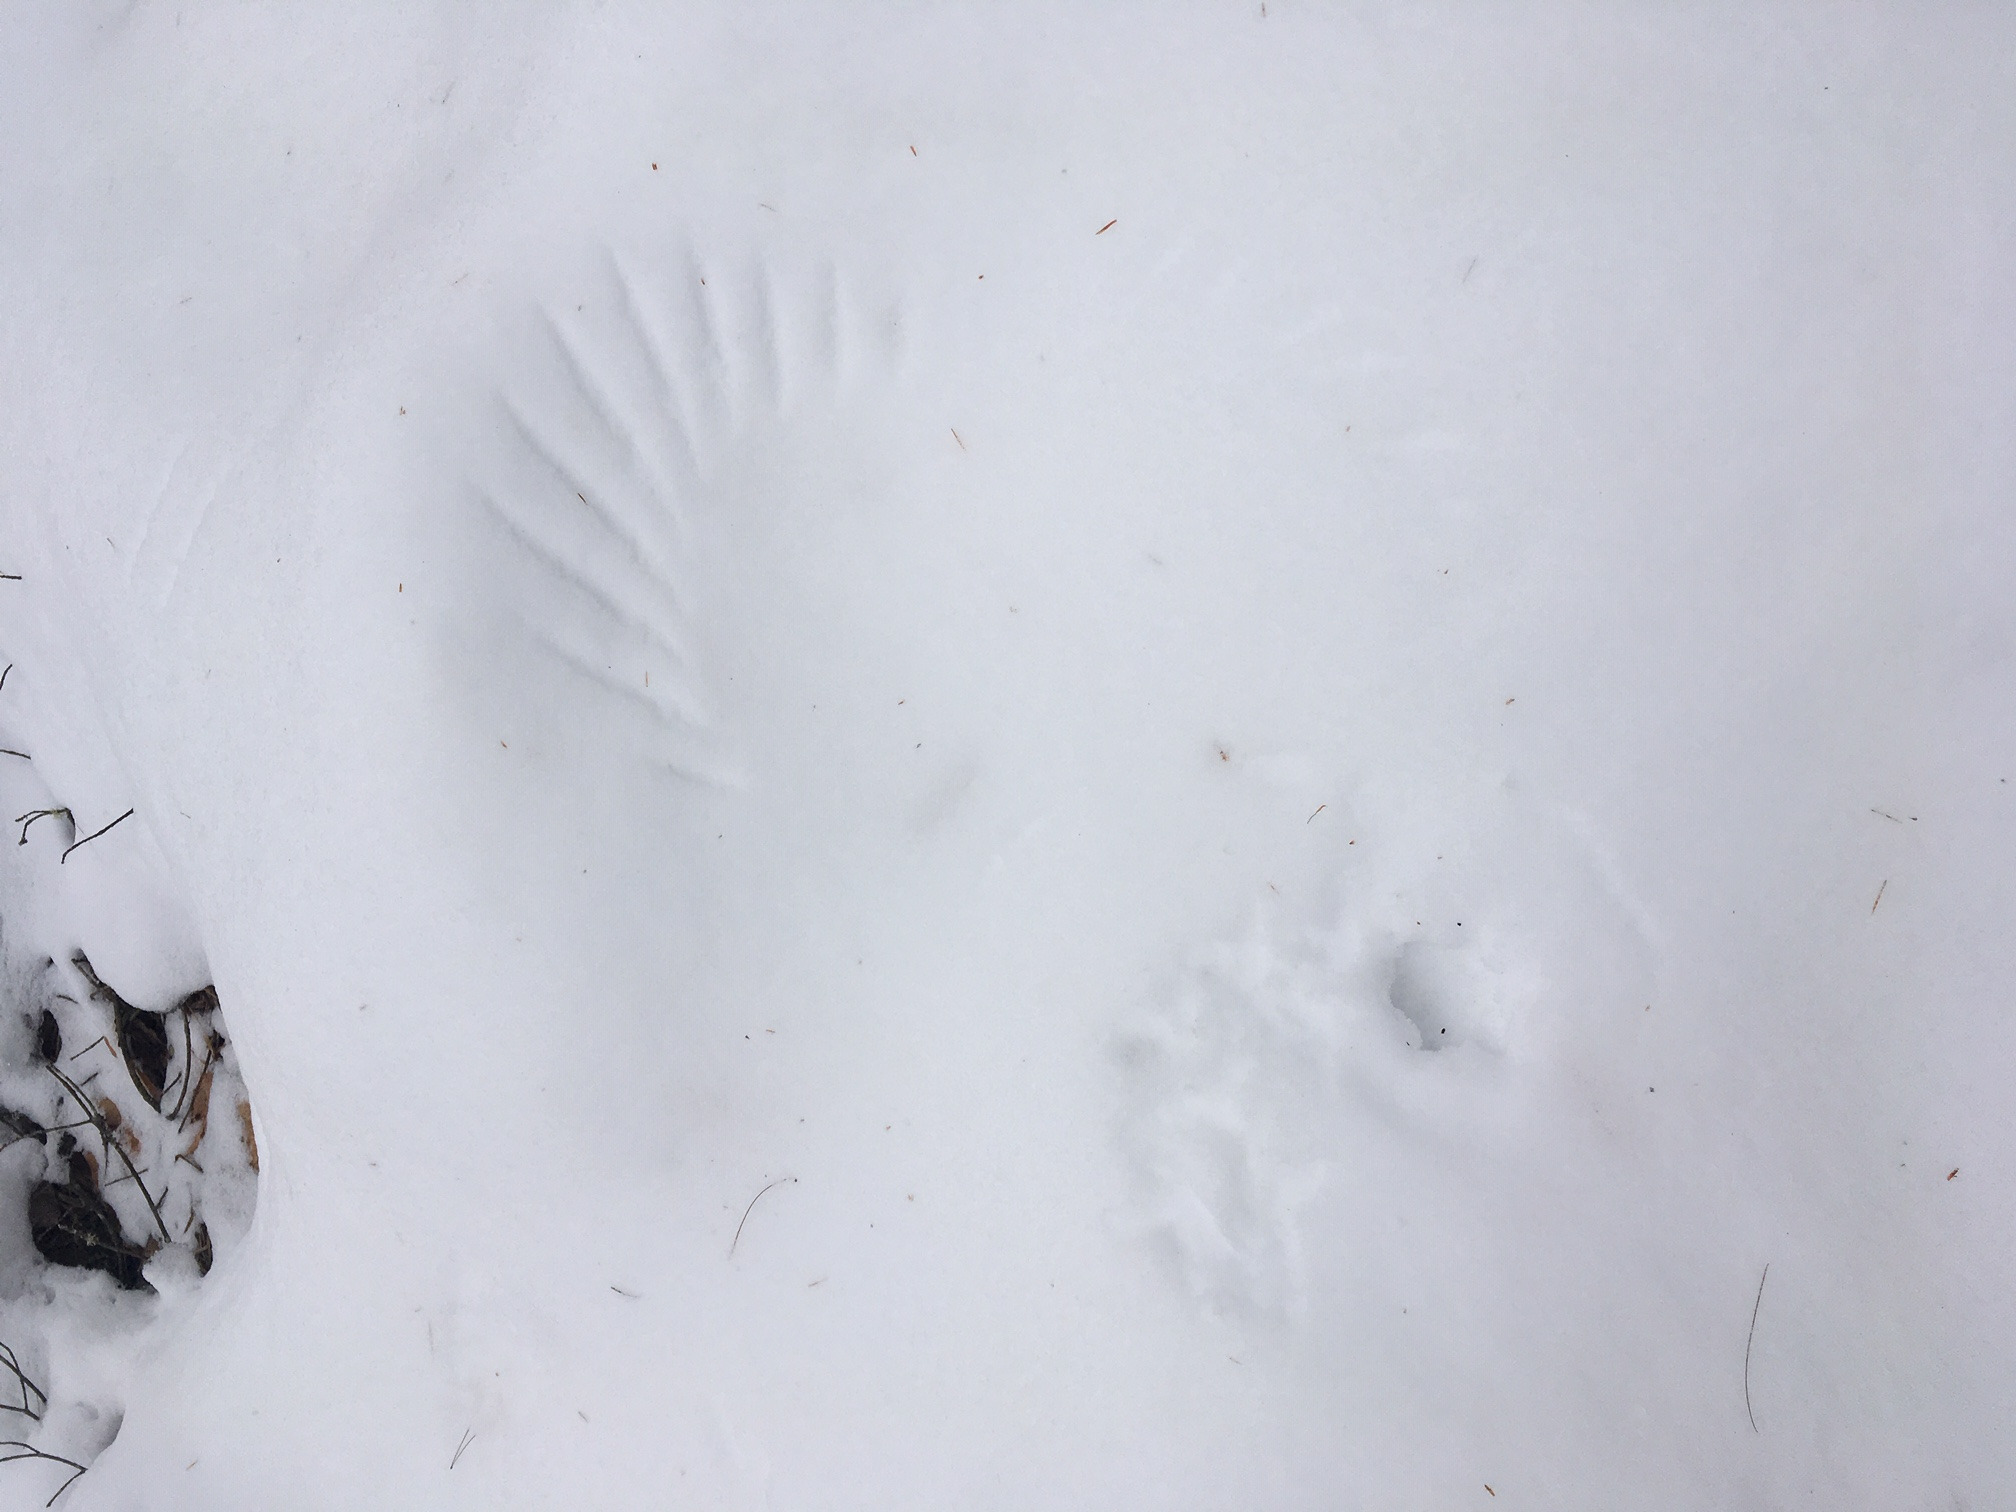 Animal tracks in snow at Amy's Park